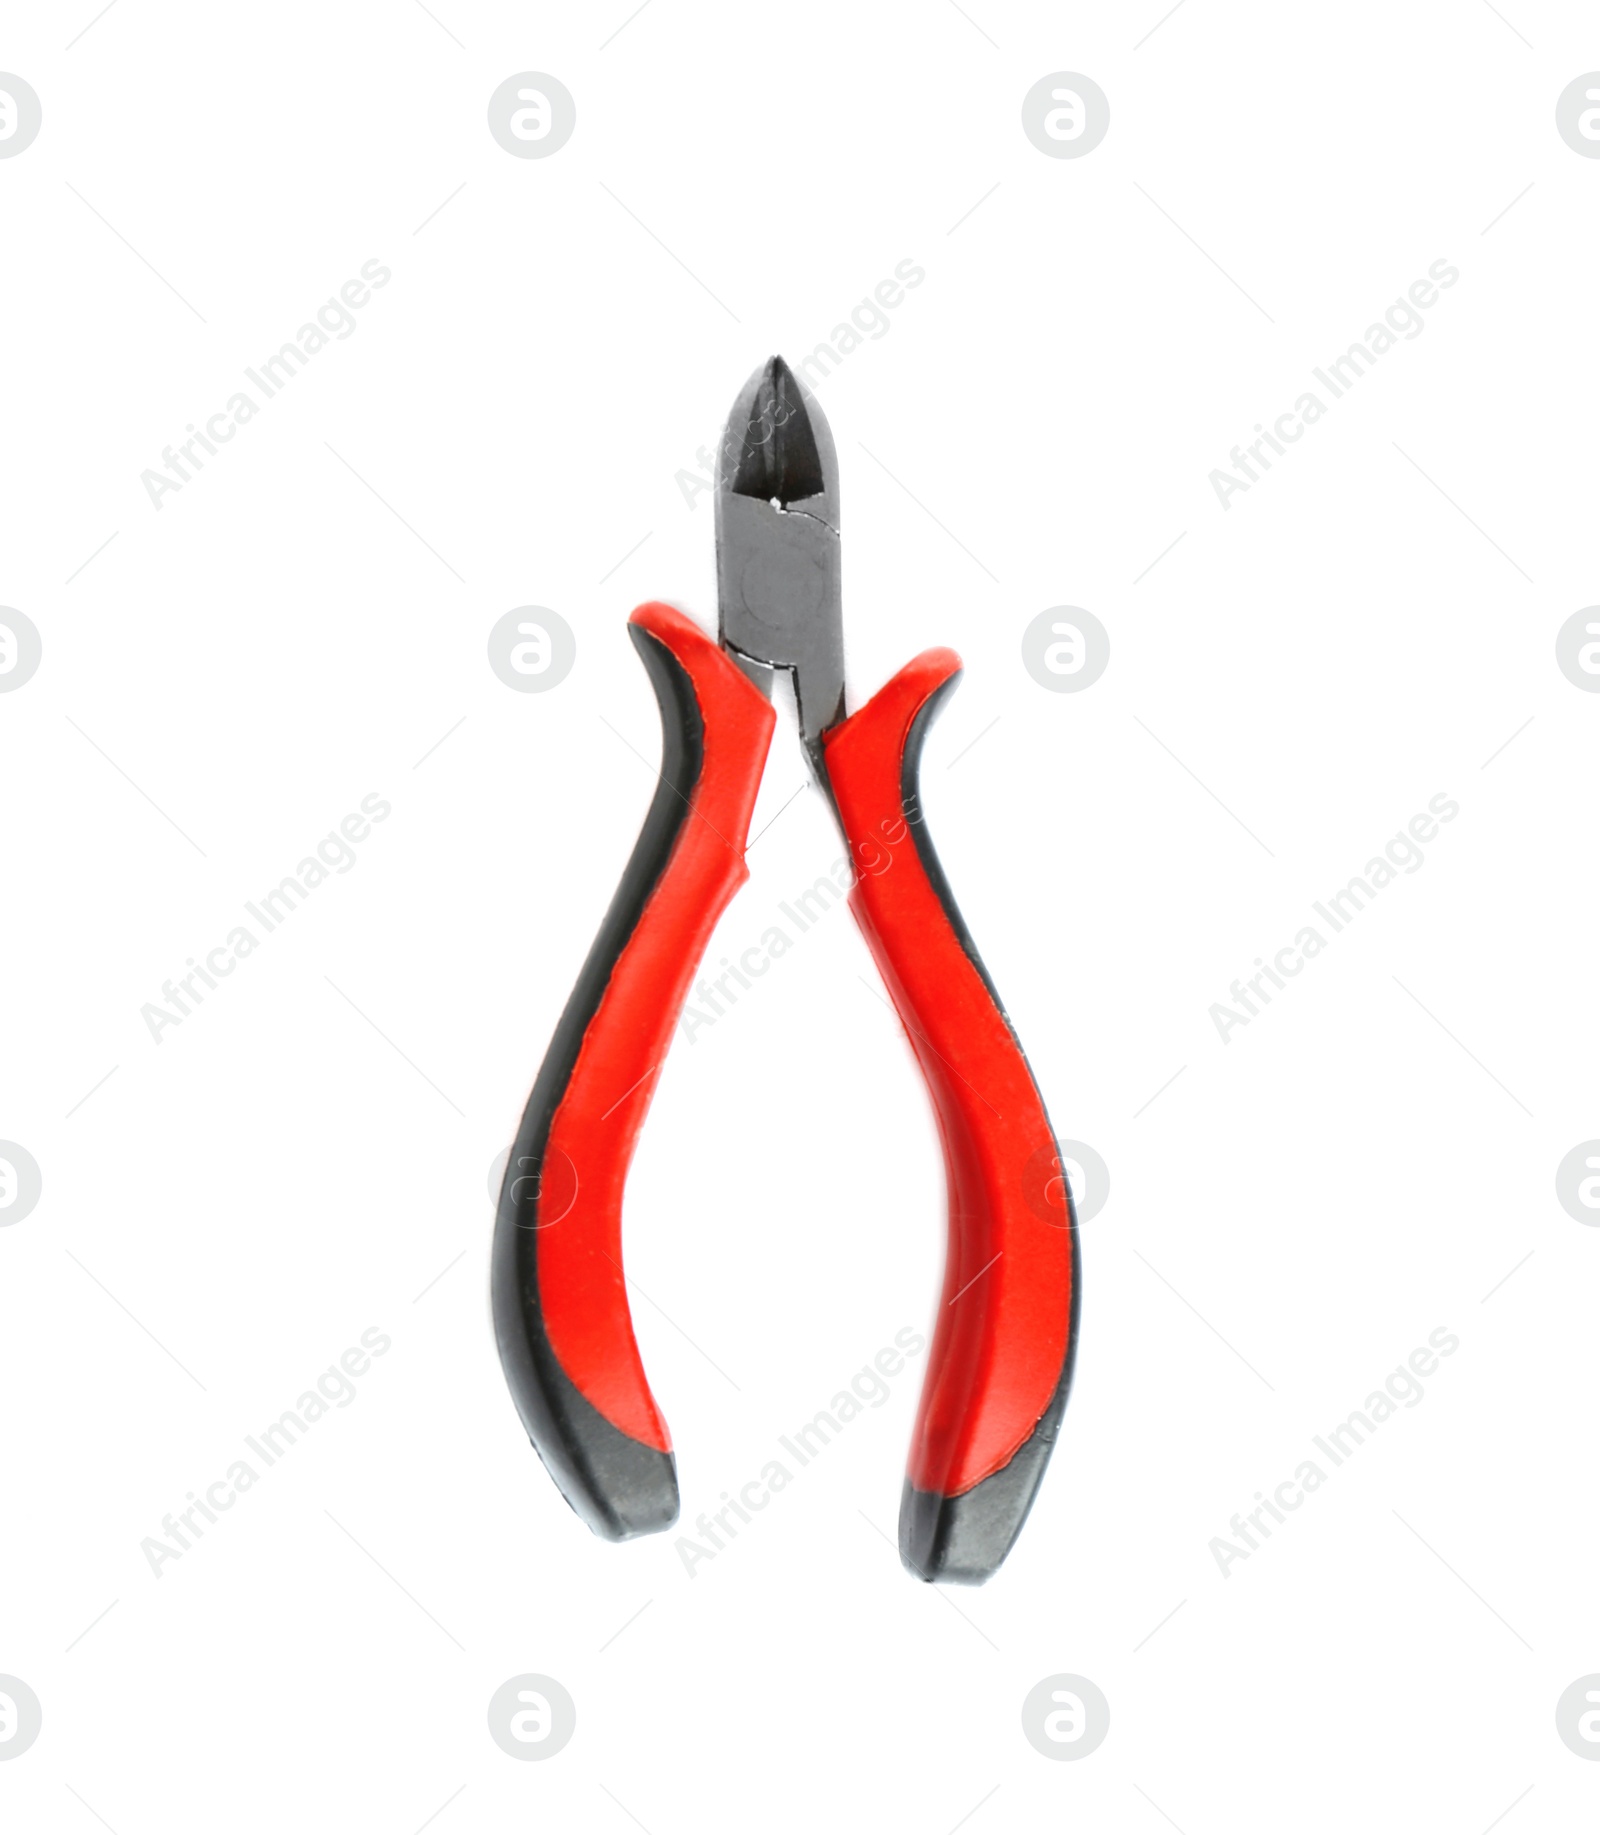 Photo of New cut pliers on white background, top view. Construction tools